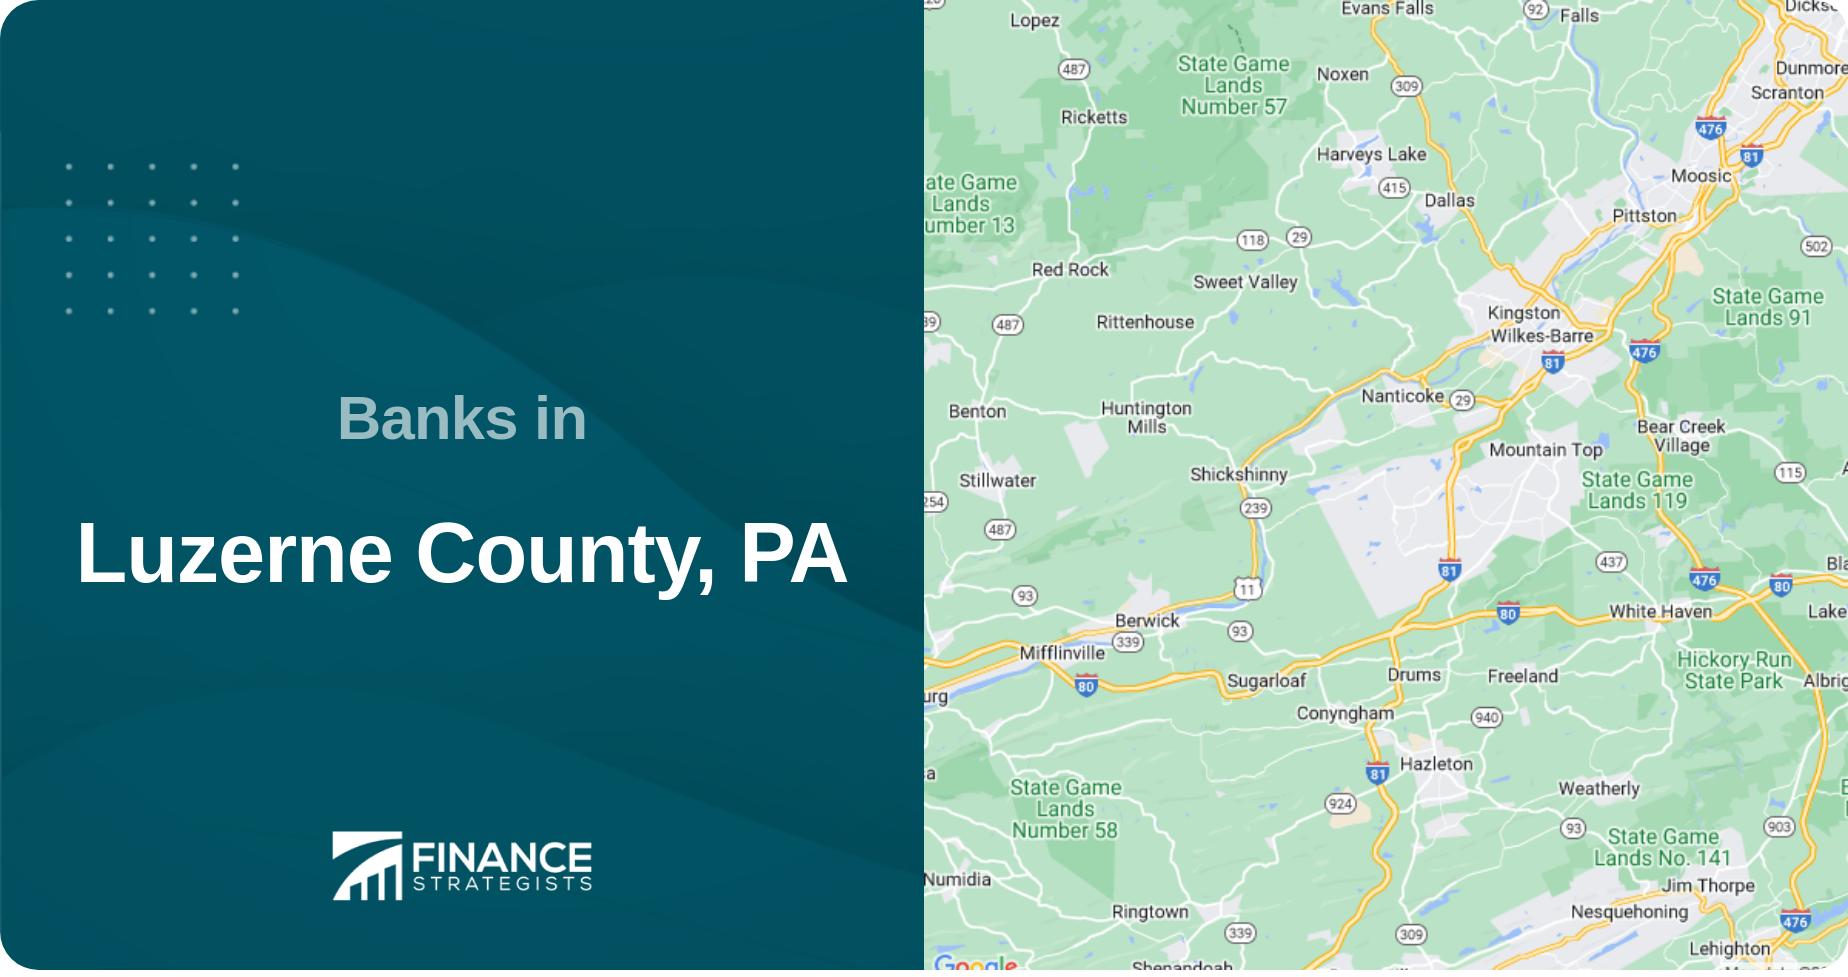 Banks in Luzerne County, PA